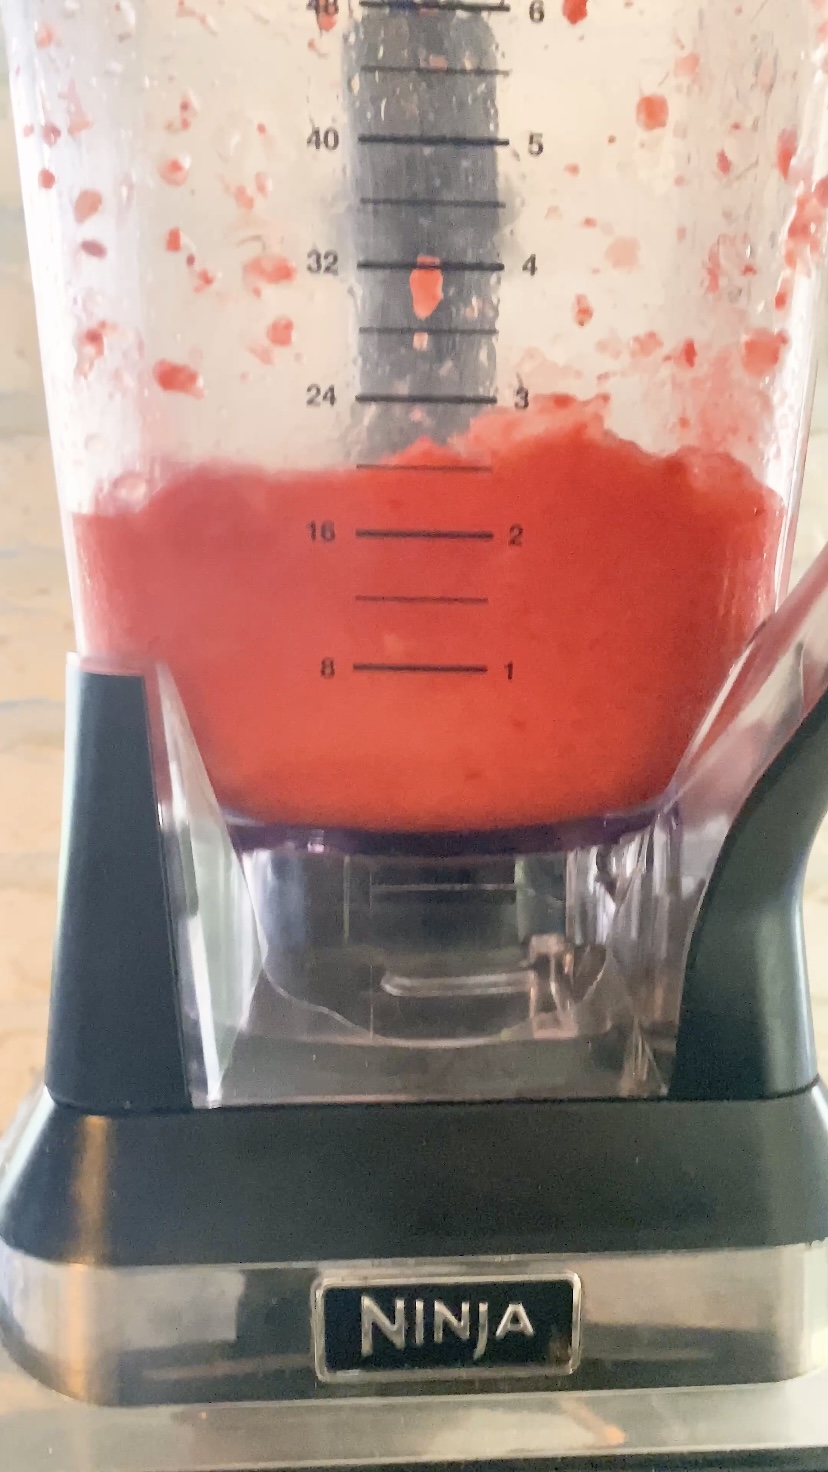 A pinky red margarita in a blender.